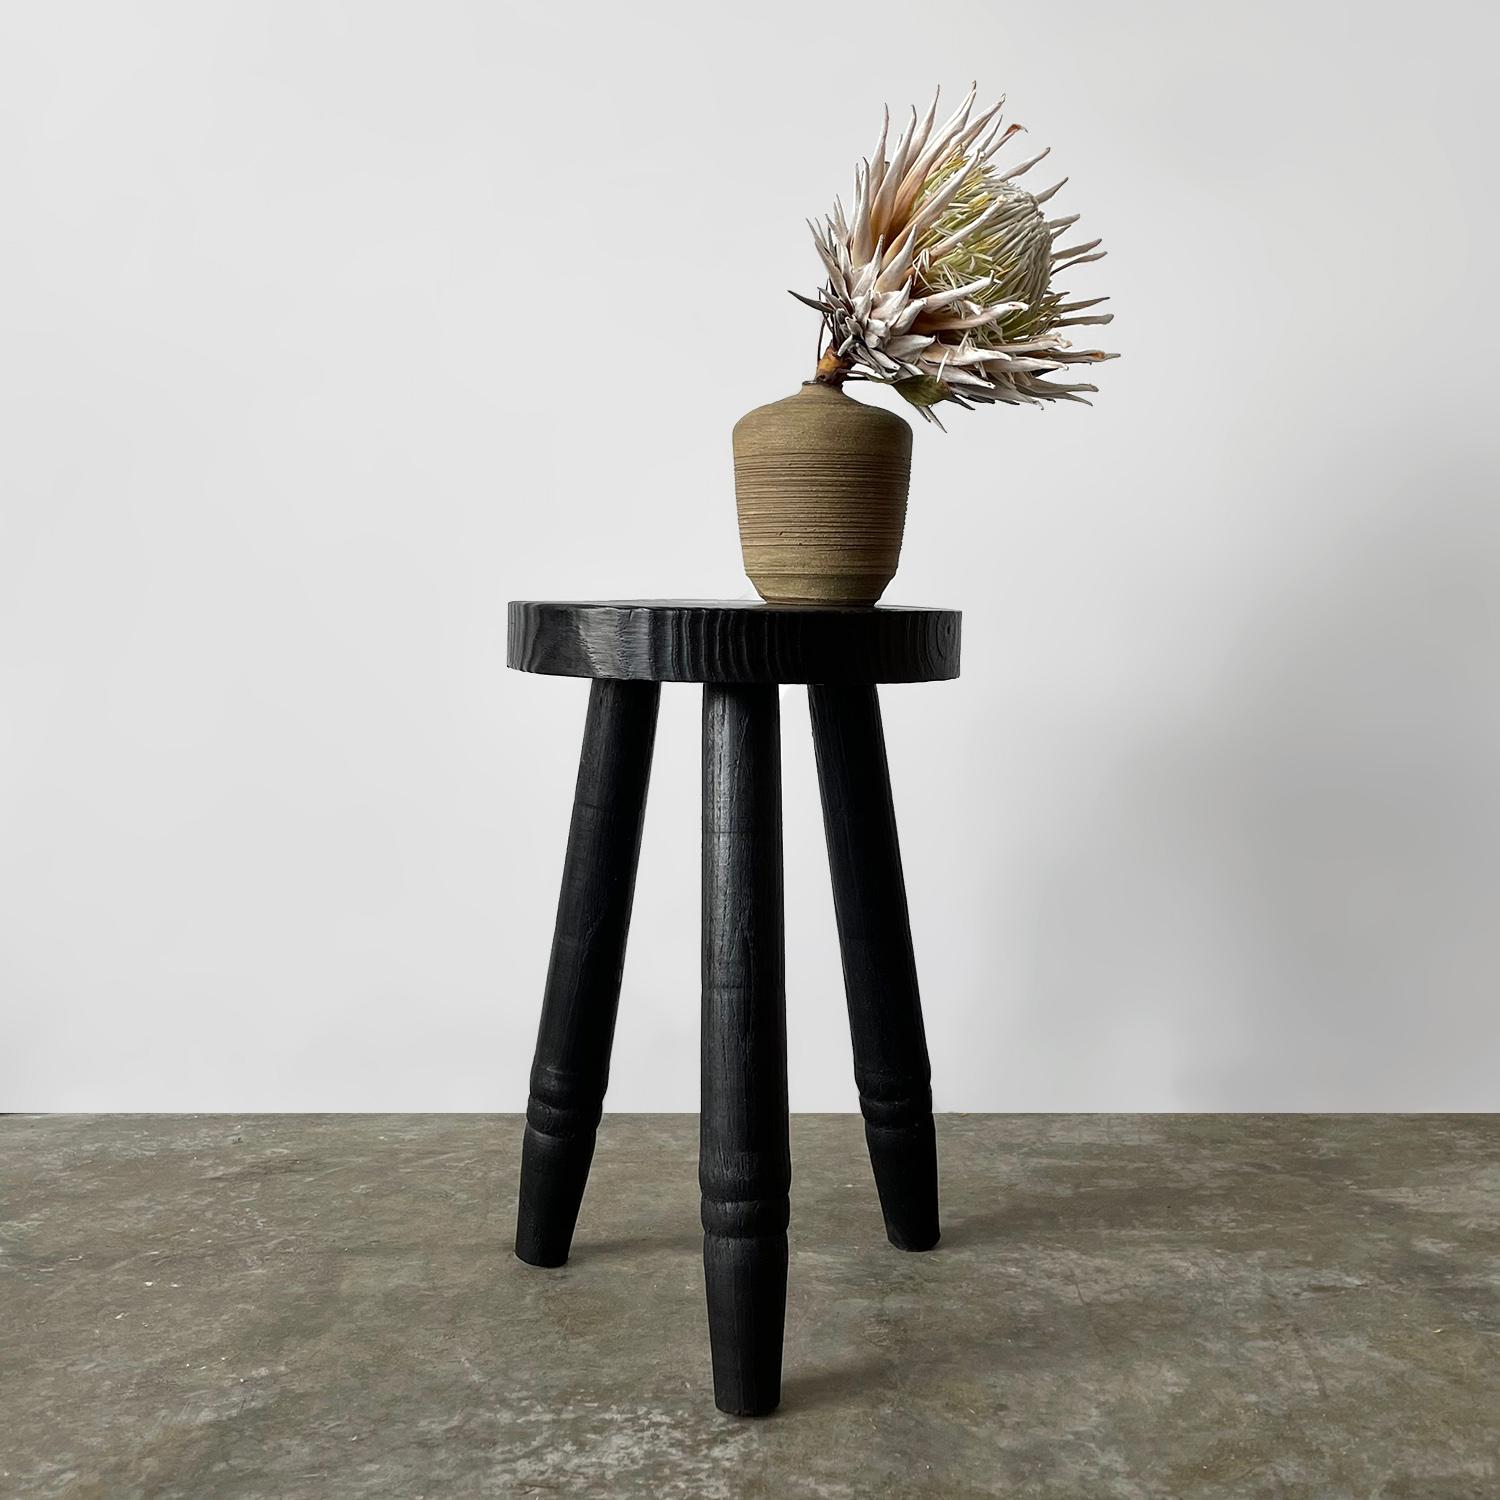 French oak tripod stool
France, mid century
We believe this stool was hand crafted by someone with a deep appreciation and love for wood
Wonderful textured grain detail which has been preserved through the construction process
Black noir finish with